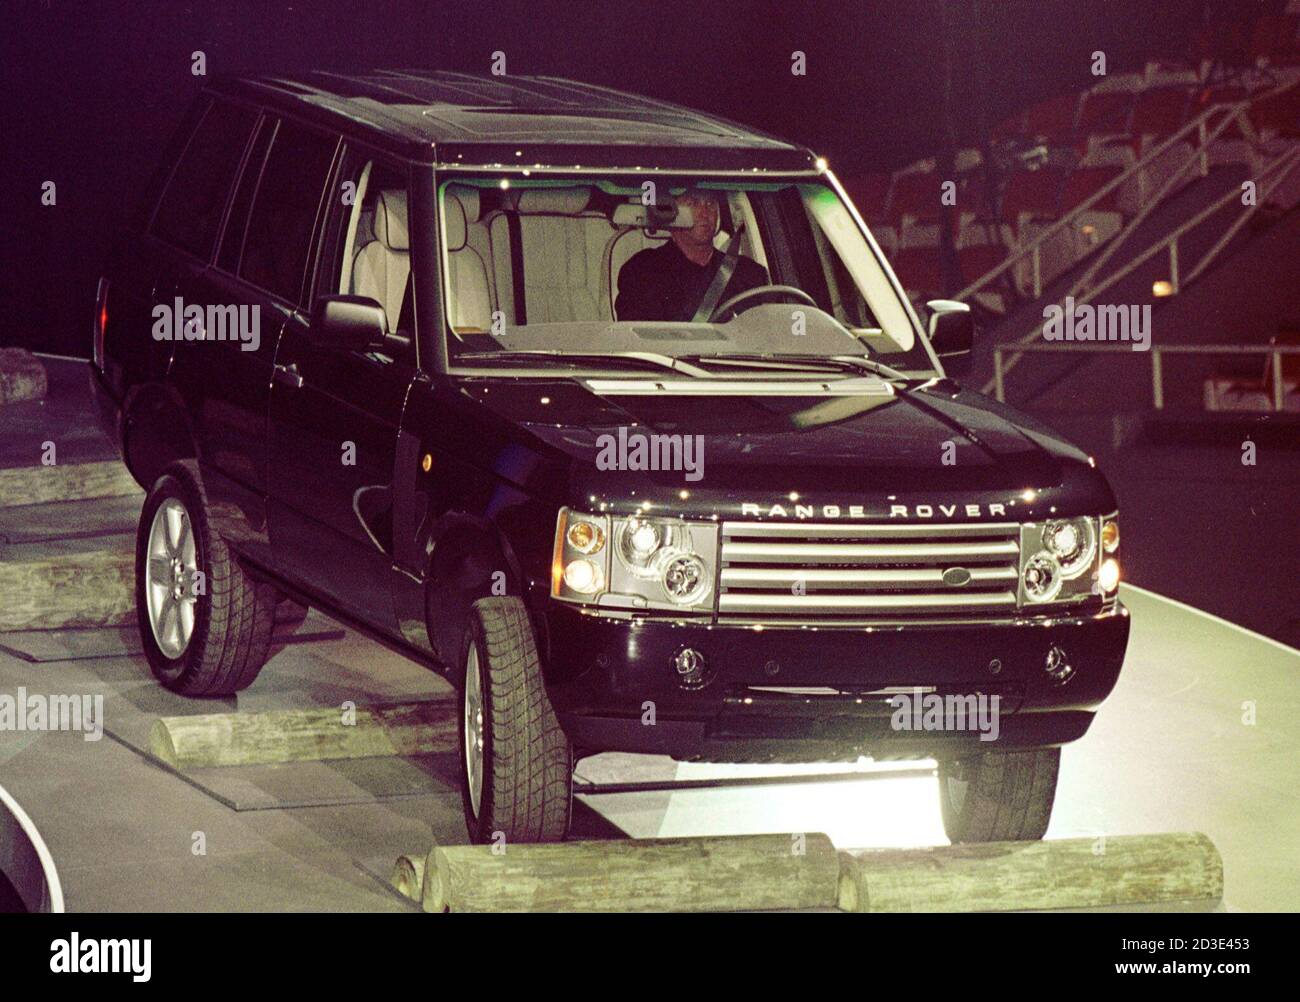 Land Rover's new flagship Range Rover sport utility vehicle makes its  worldwide debut, January 7, 2002, at the North American International Auto  Show in Detroit. The company says it hopes the new